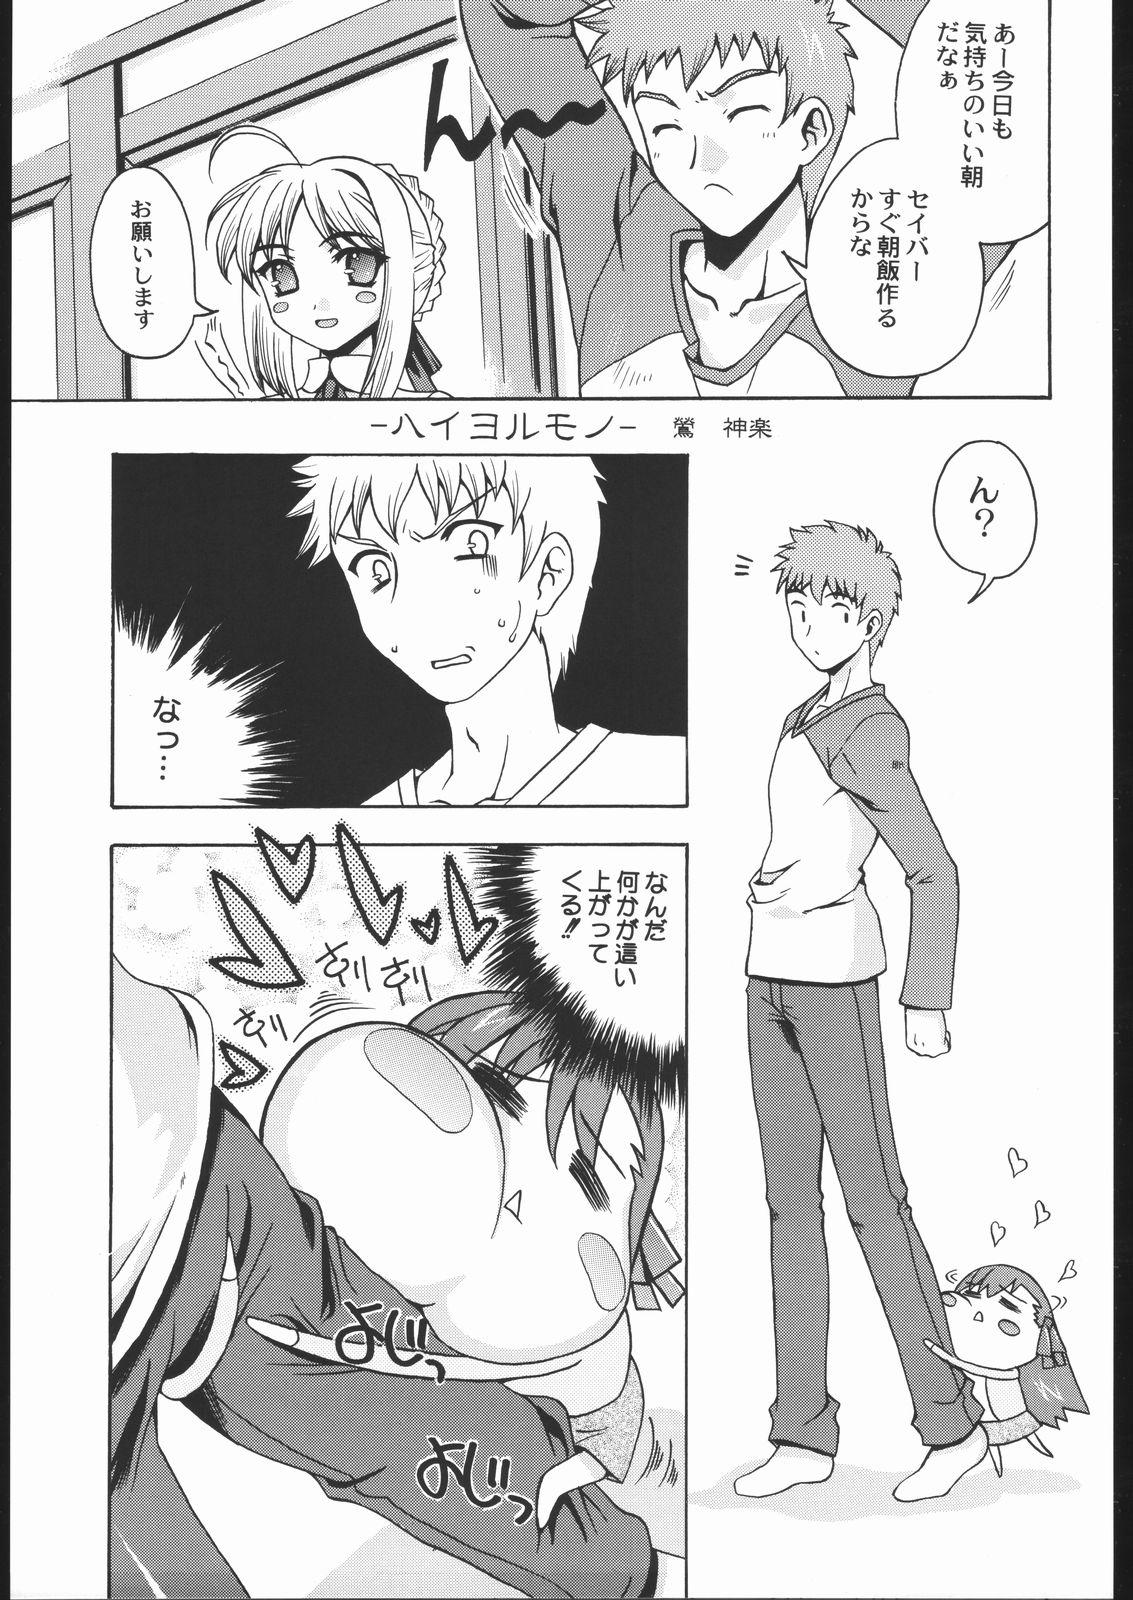 Real Amature Porn Going My Way - Fate stay night Free Fucking - Page 4